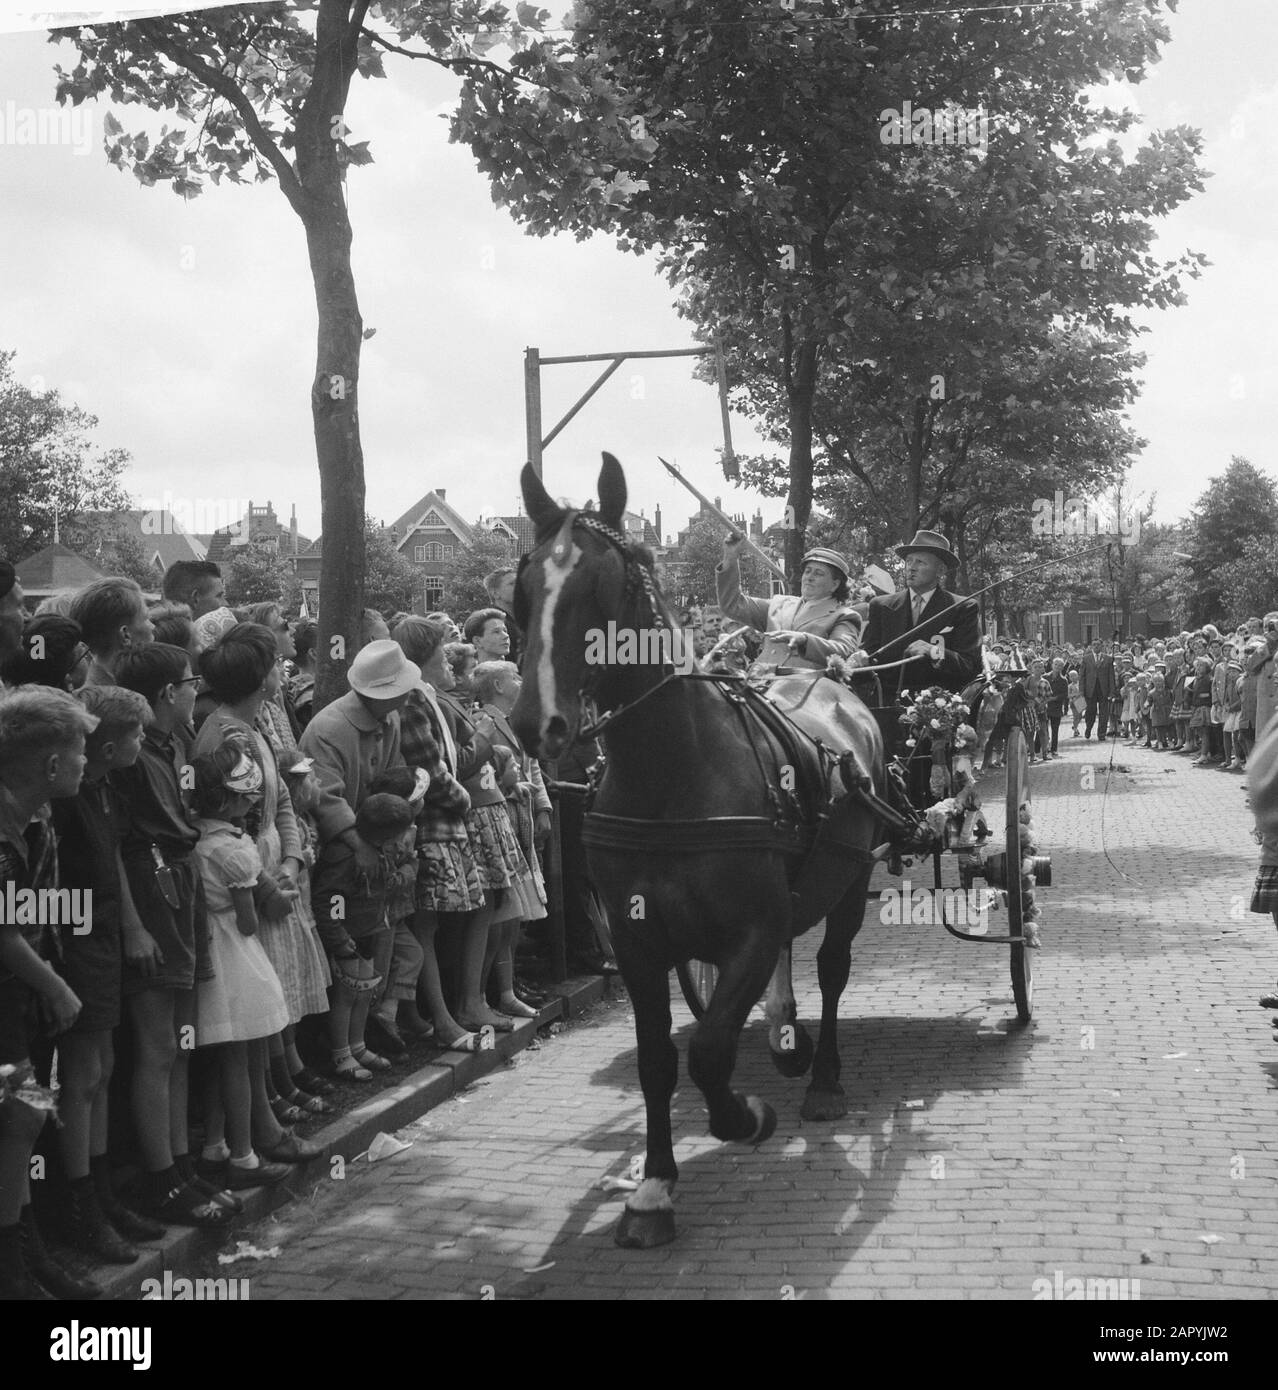 Purmerend 550 year city, ring stitches in costume Date: 14 July 1960 Location: Purmerend Keywords: RINGSTICLE, costume Stock Photo